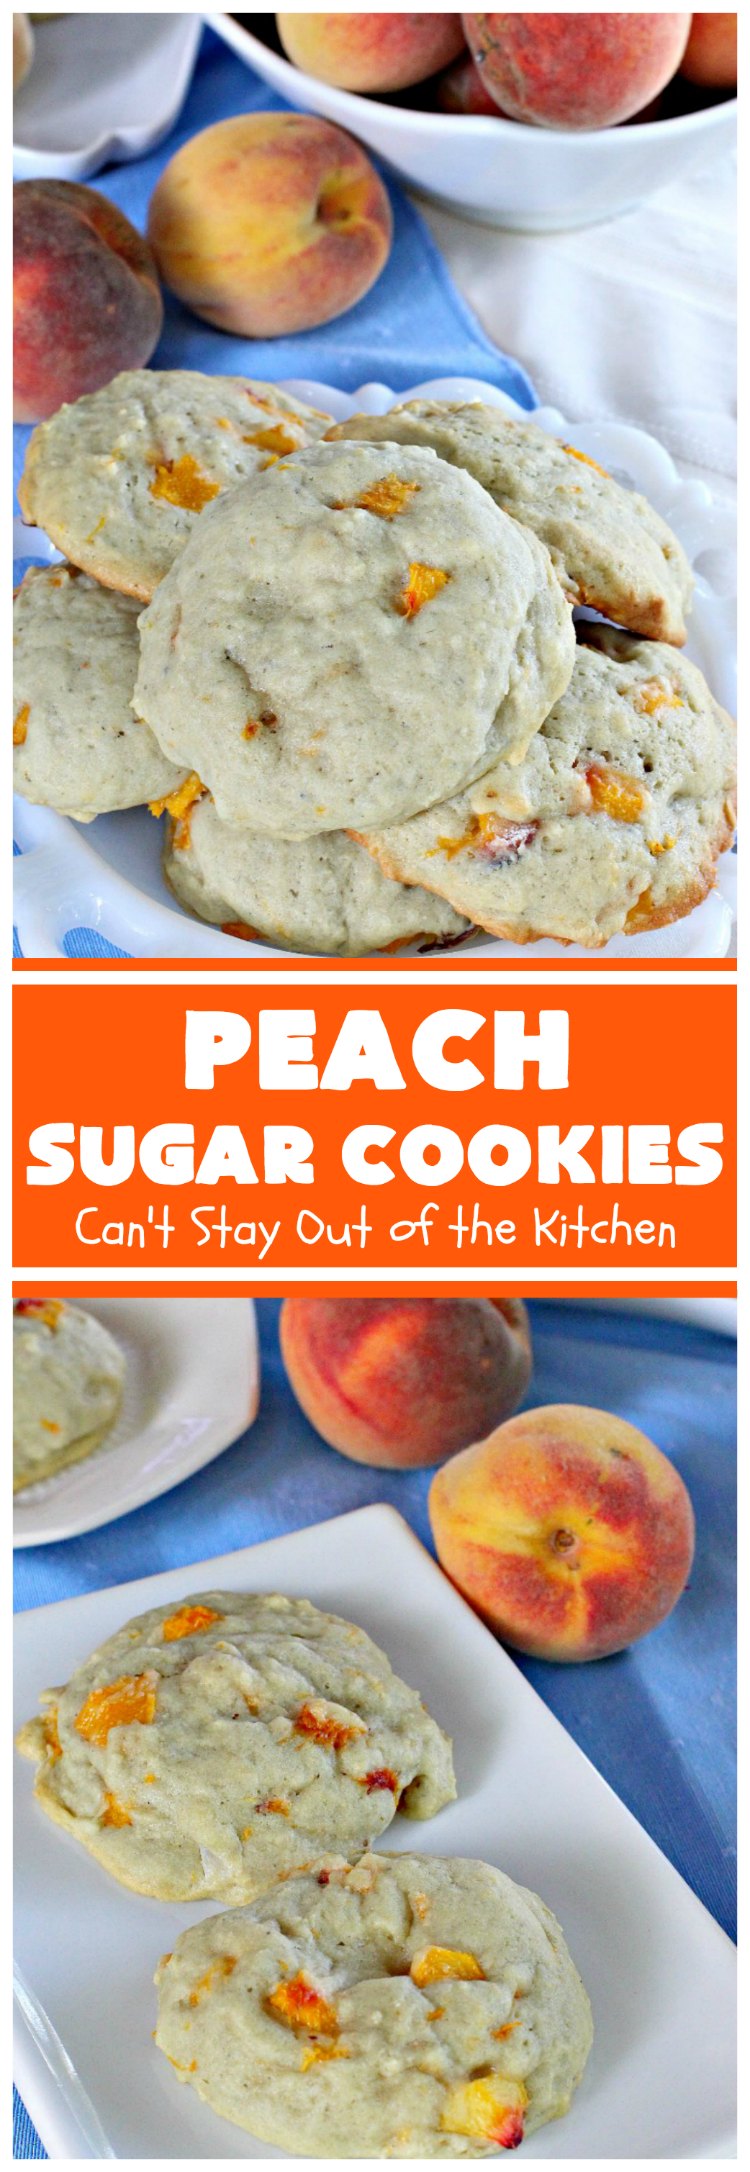 Peach Sugar Cookies | Can't Stay Out of the KitchenPeach Sugar Cookies | Can't Stay Out of the Kitchen